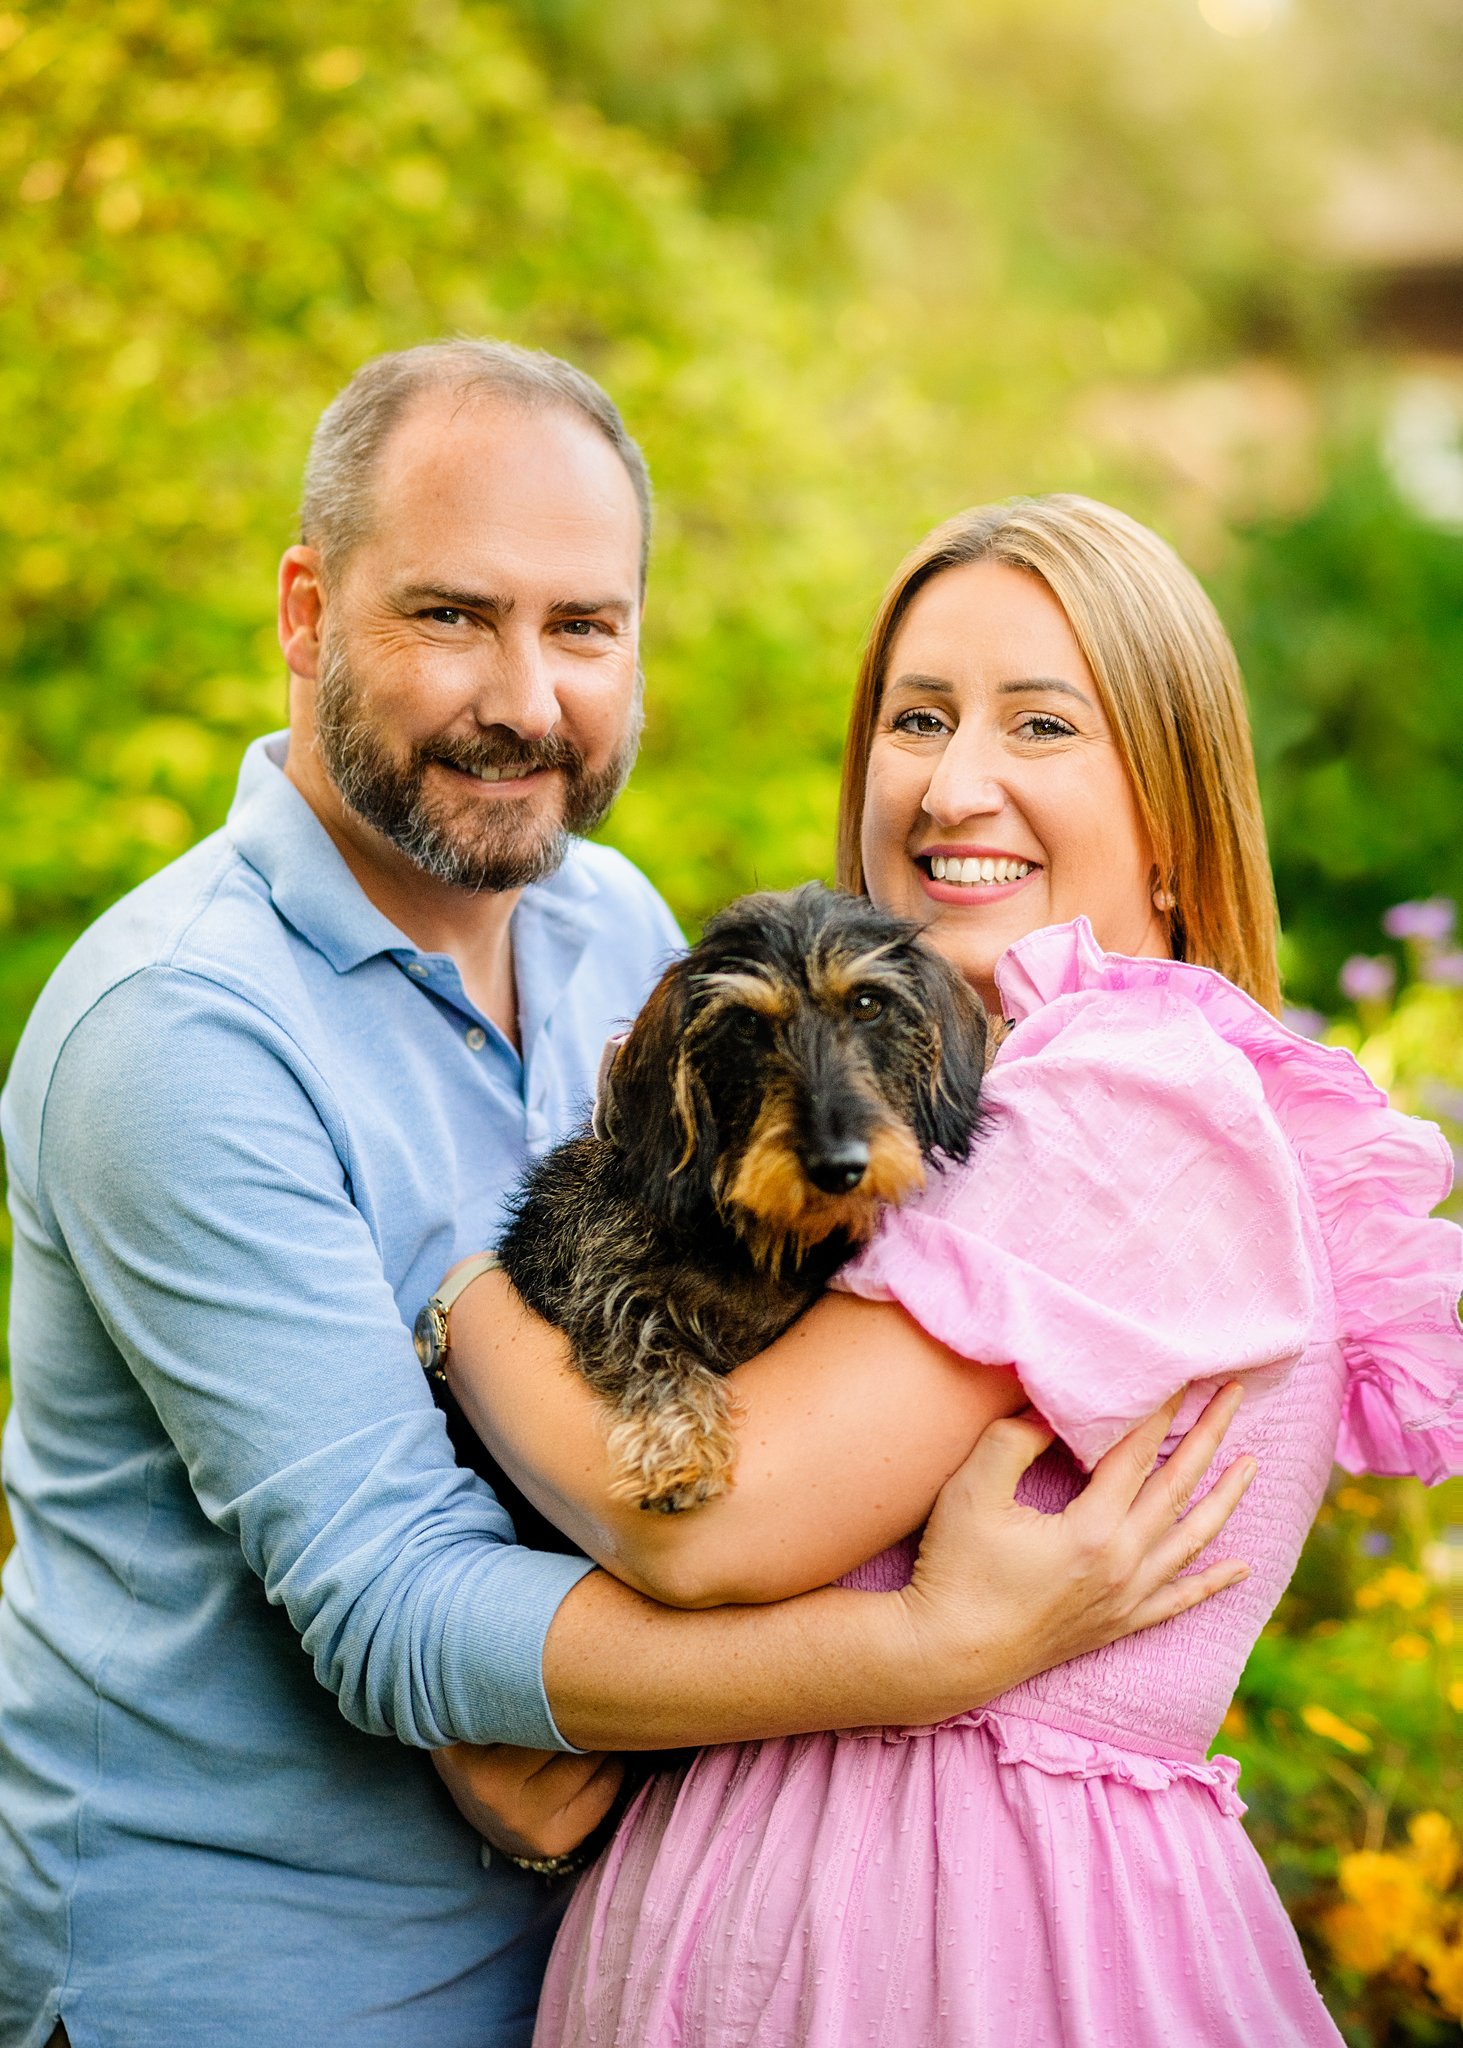 Smiling couple holding their dog in a sun-kissed Nottingham garden, radiating family warmth and joy.